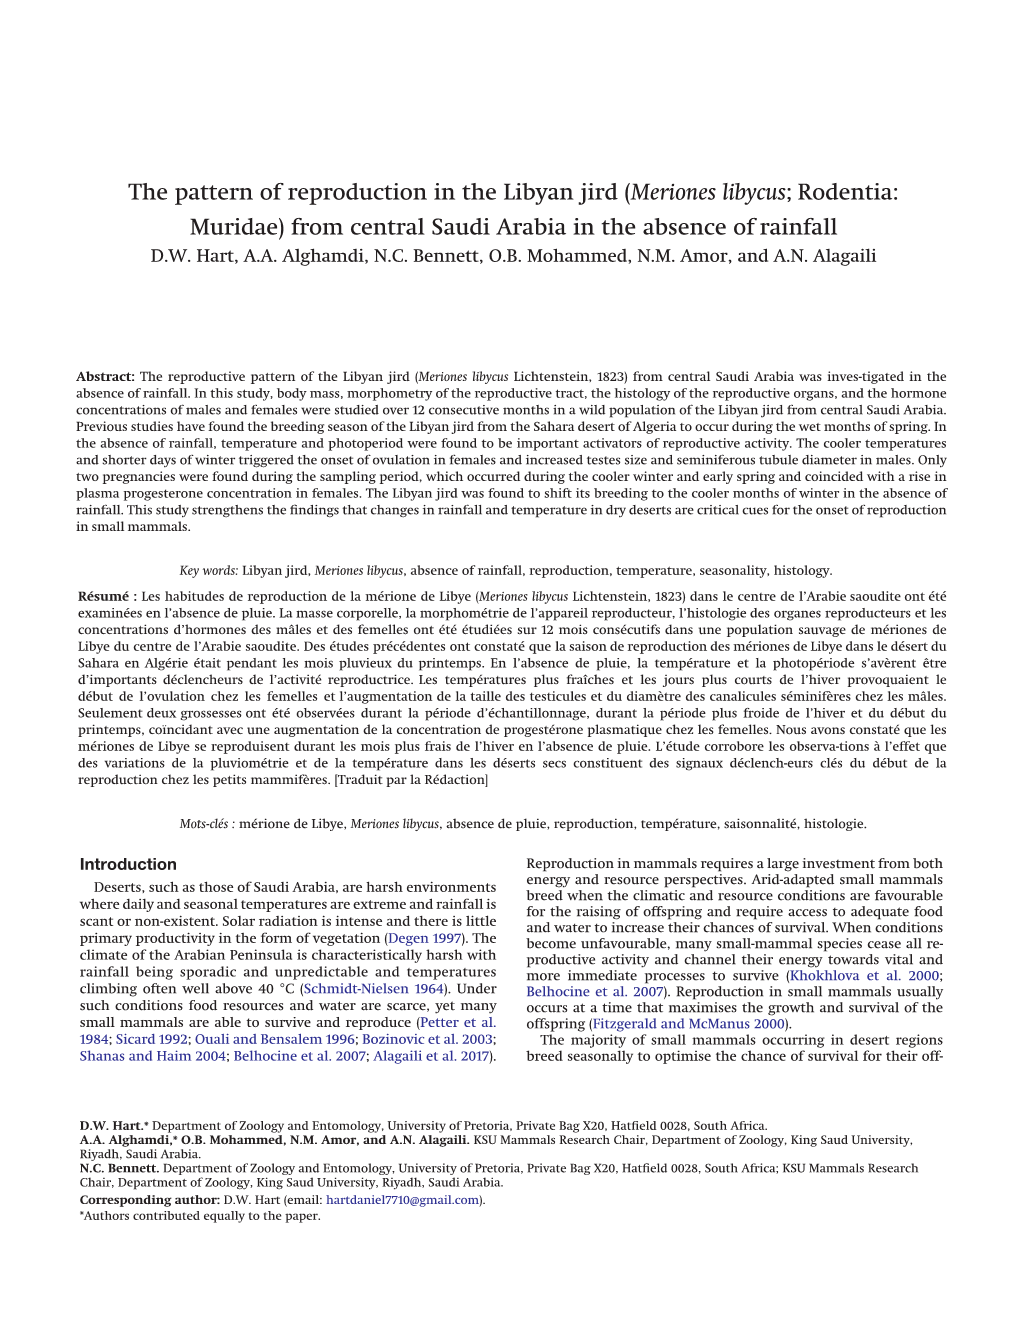 The Pattern of Reproduction in the Libyan Jird (Meriones Libycus; Rodentia: Muridae) from Central Saudi Arabia in the Absence of Rainfall D.W